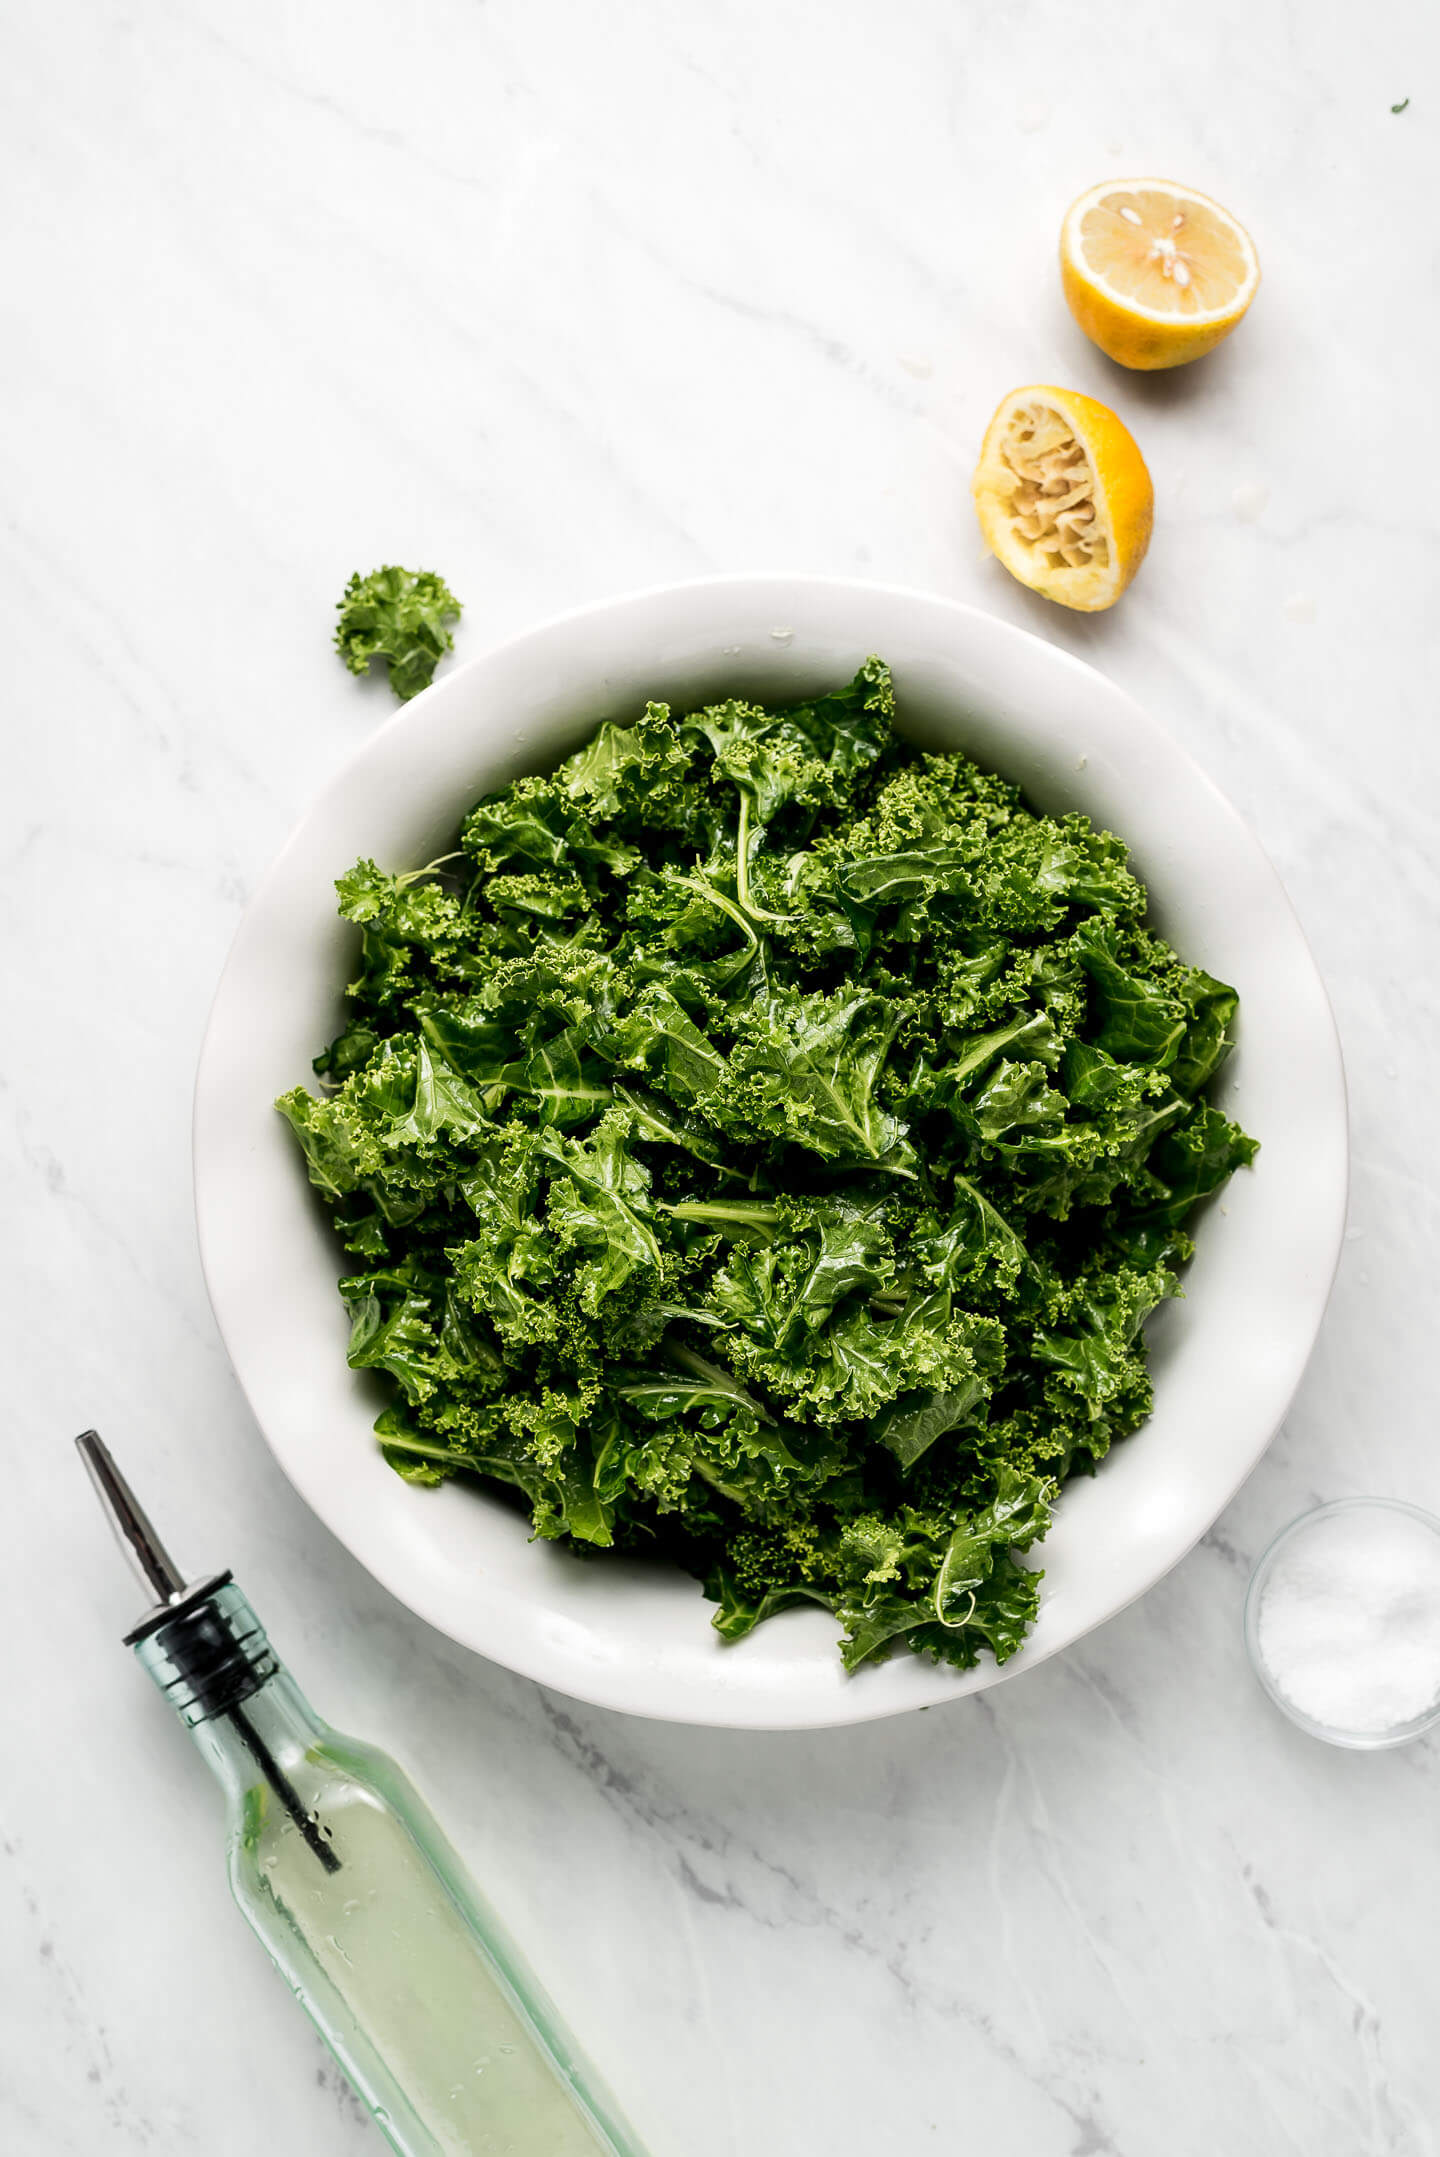 Massaged Kale in a shallow bowl with a squeeze lemon, bottle of oil, and bowl of salt to the sides.